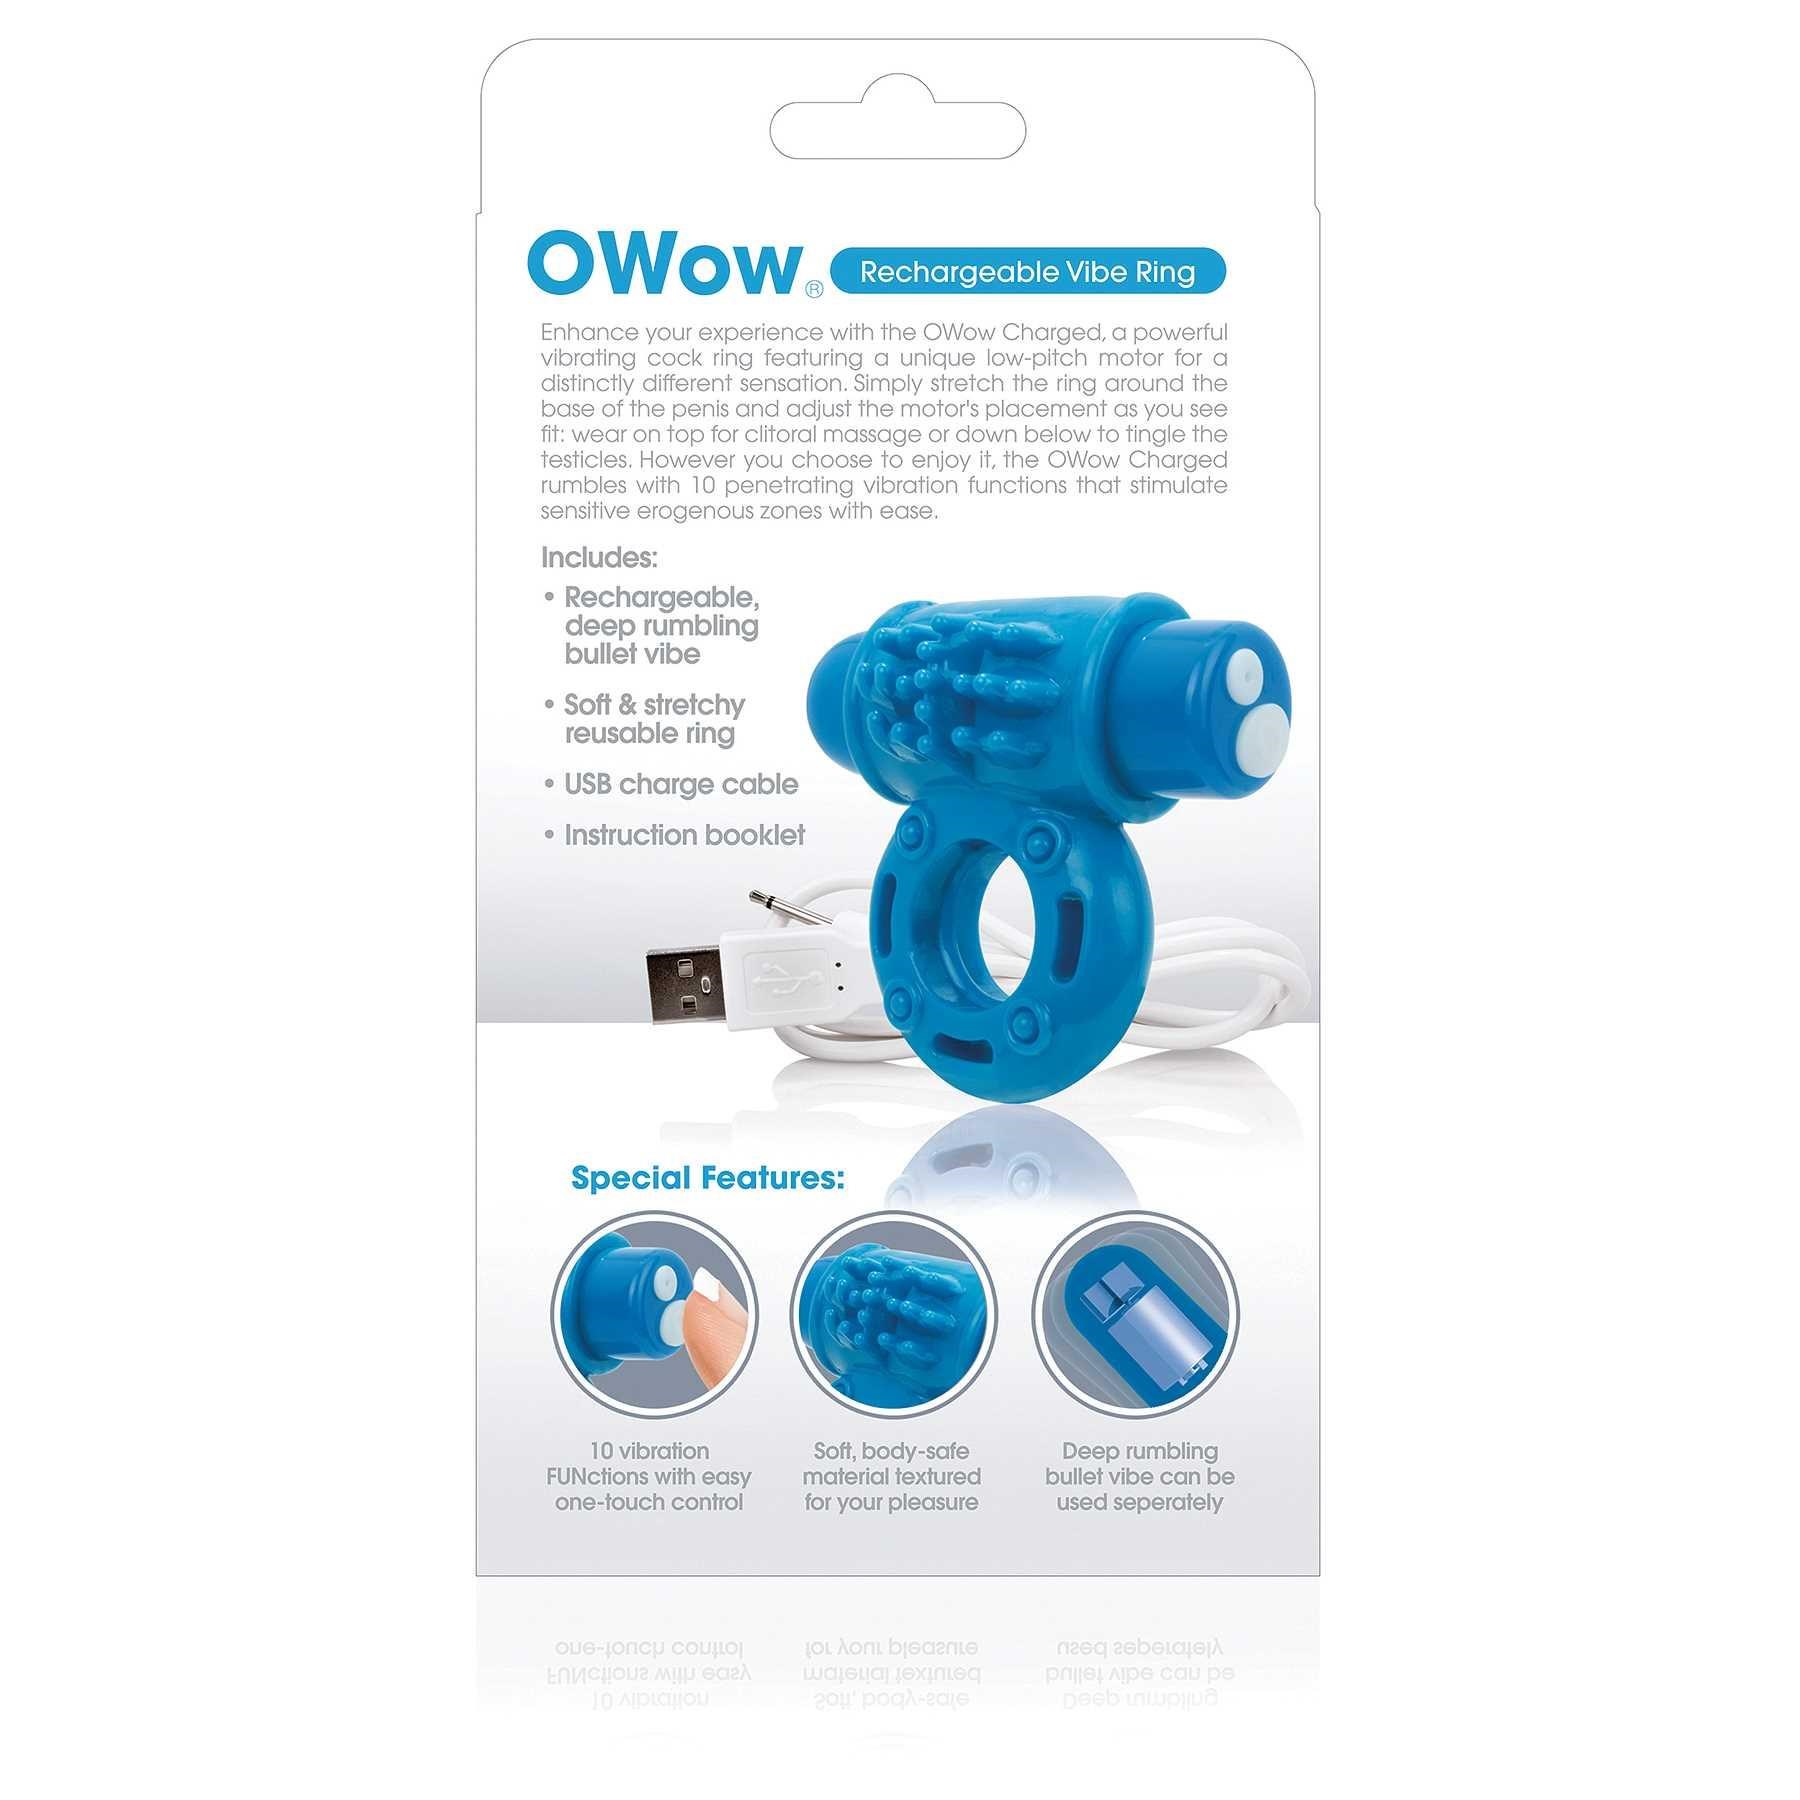 Charged O WOW Vibe Ring specifications